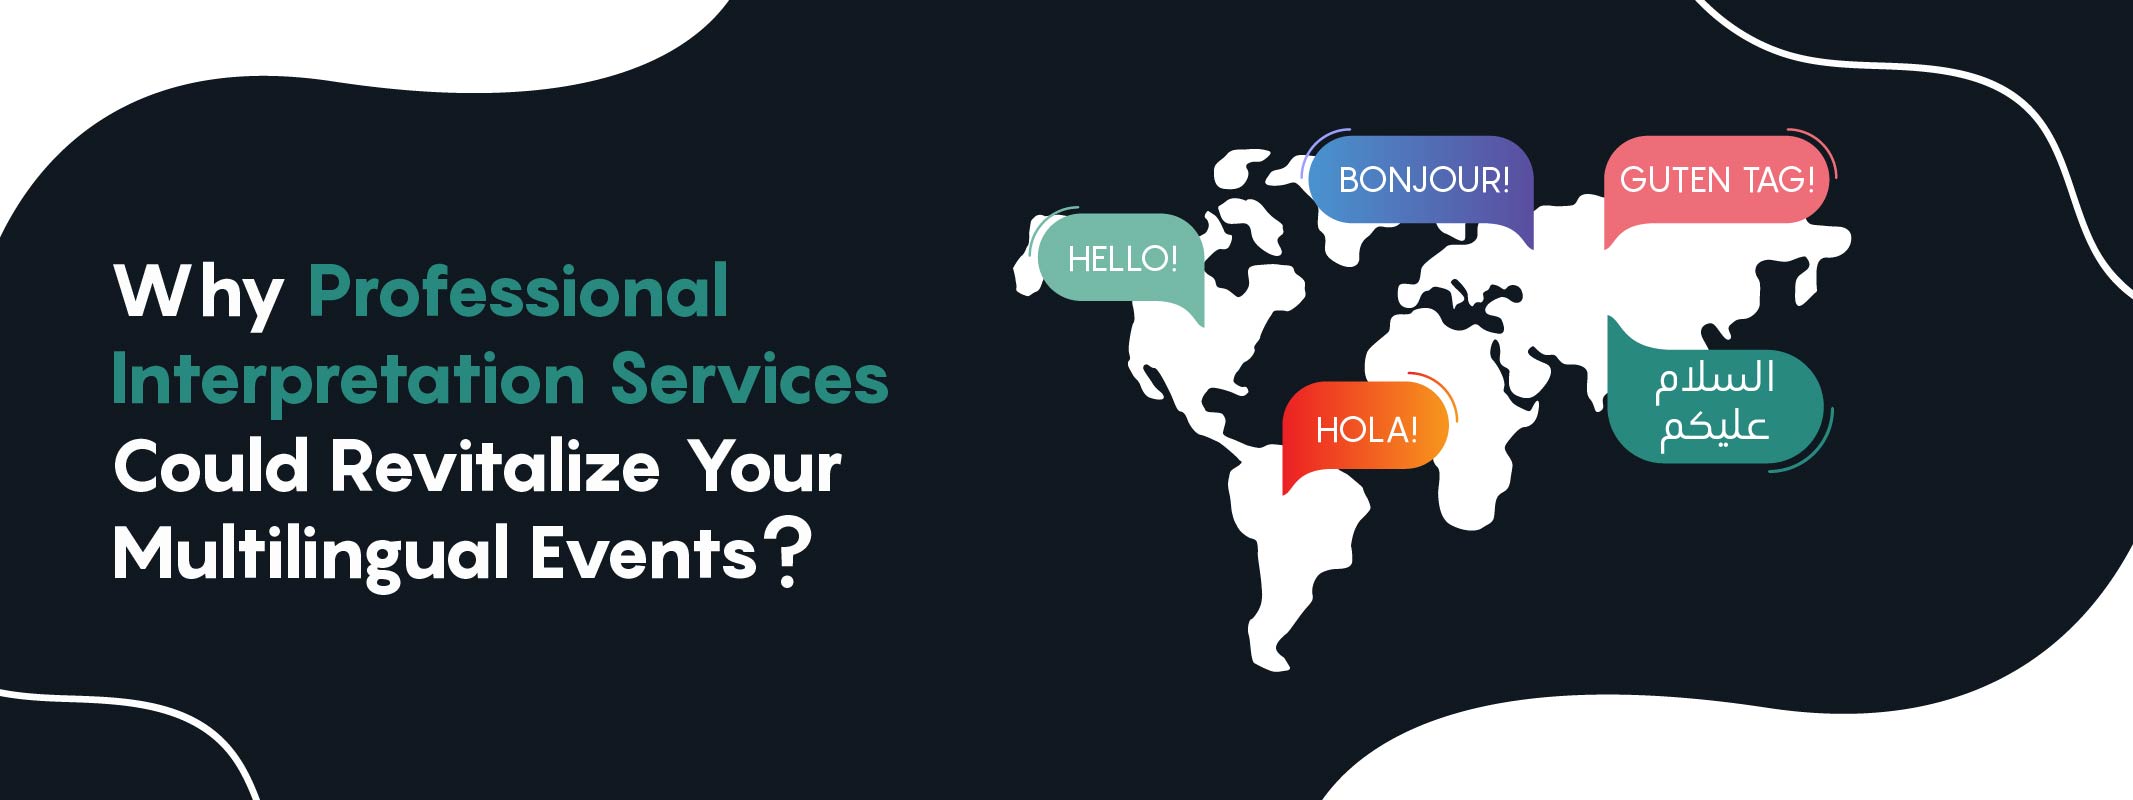 Why Professional Interpretation Services Could Revitalize Your Multilingual Events 